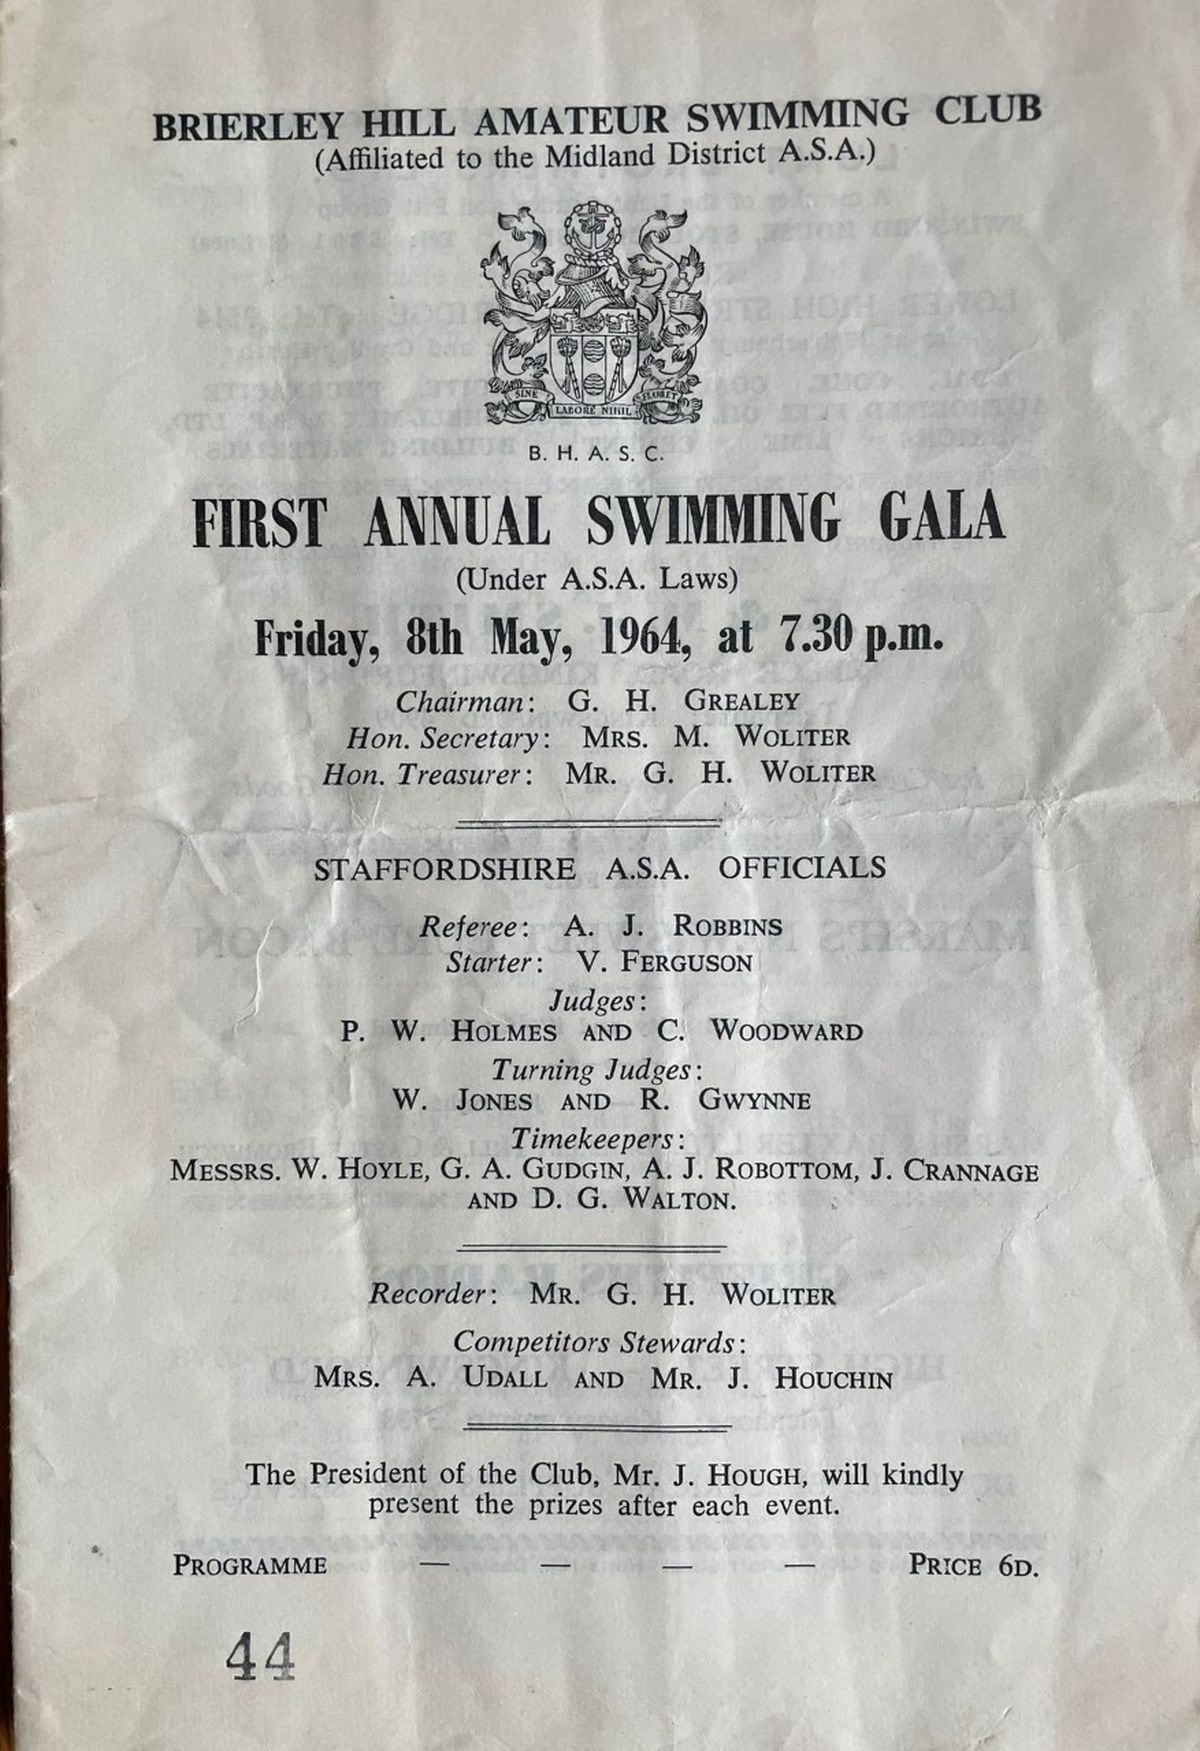 The programme for the club's first gala in 1964